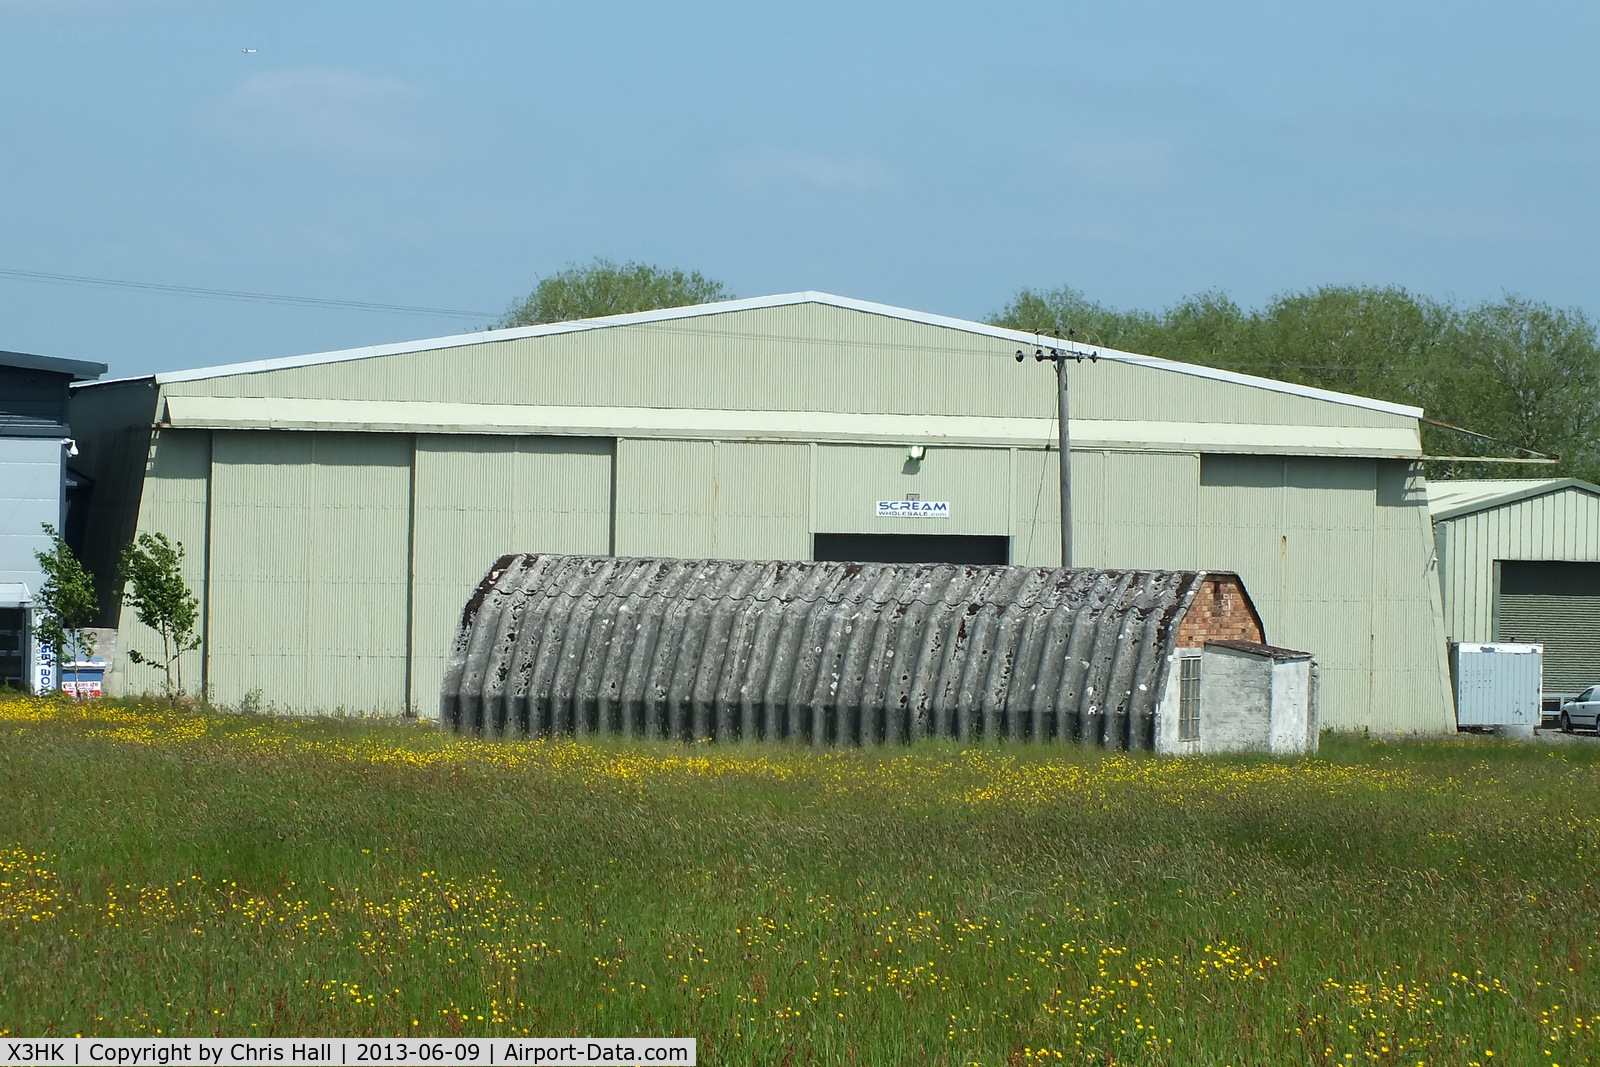 X3HK Airport - one of the two surviving Pentad Hangar at the former RNAS Hinstock, also known as: HMS Godwit / No 21 SLG / RAF Ollerton . In use between 17 October 1941 and 28 February 1947